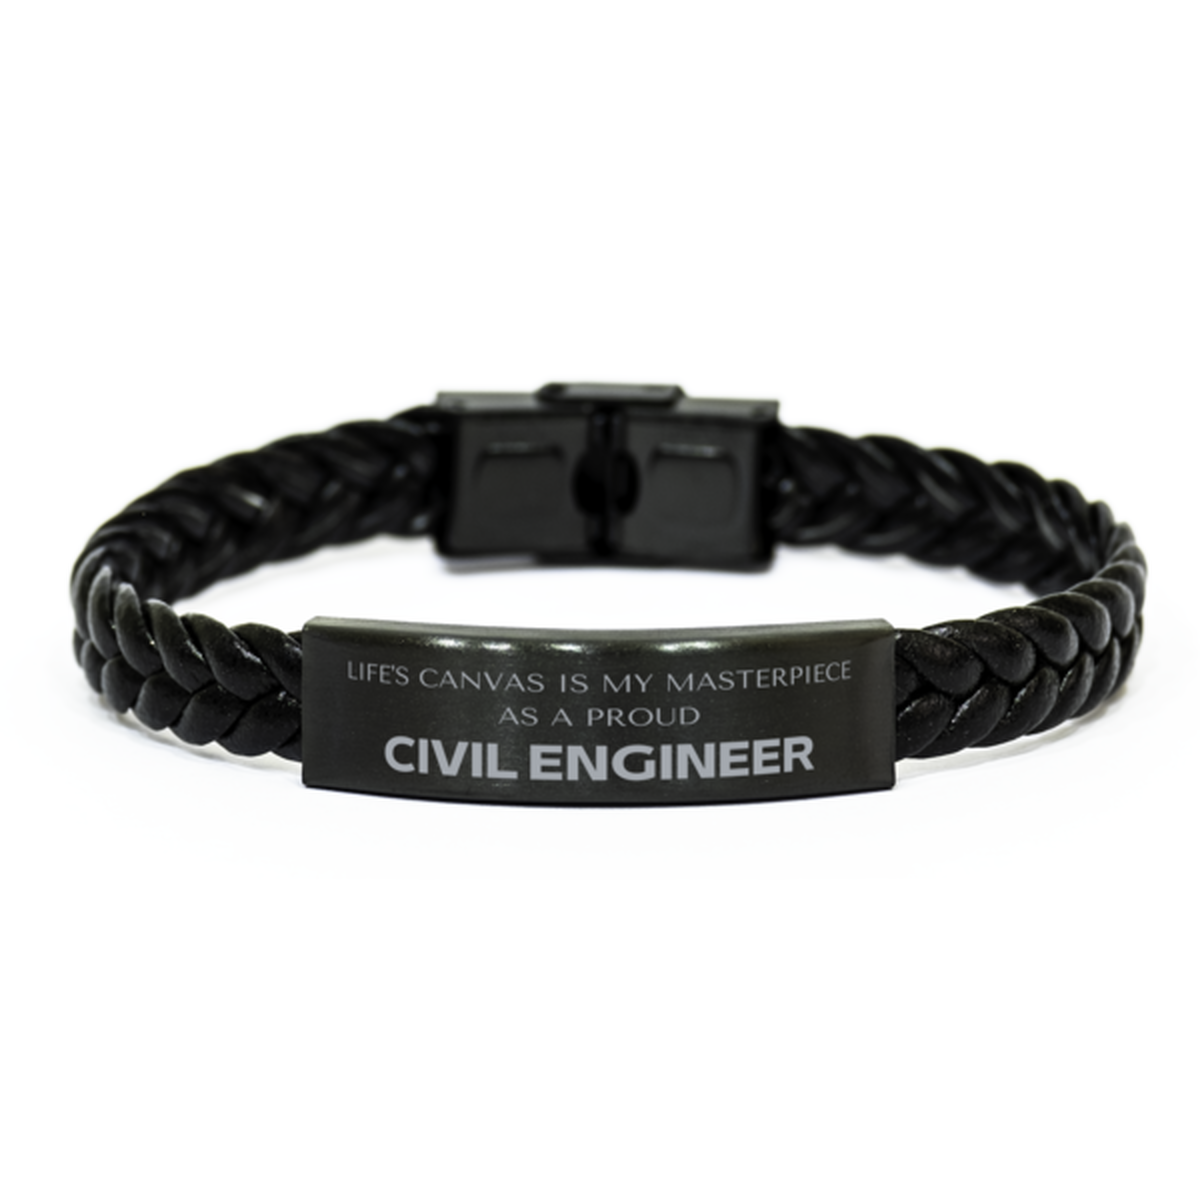 Proud Civil Engineer Gifts, Life's canvas is my masterpiece, Epic Birthday Christmas Unique Braided Leather Bracelet For Civil Engineer, Coworkers, Men, Women, Friends